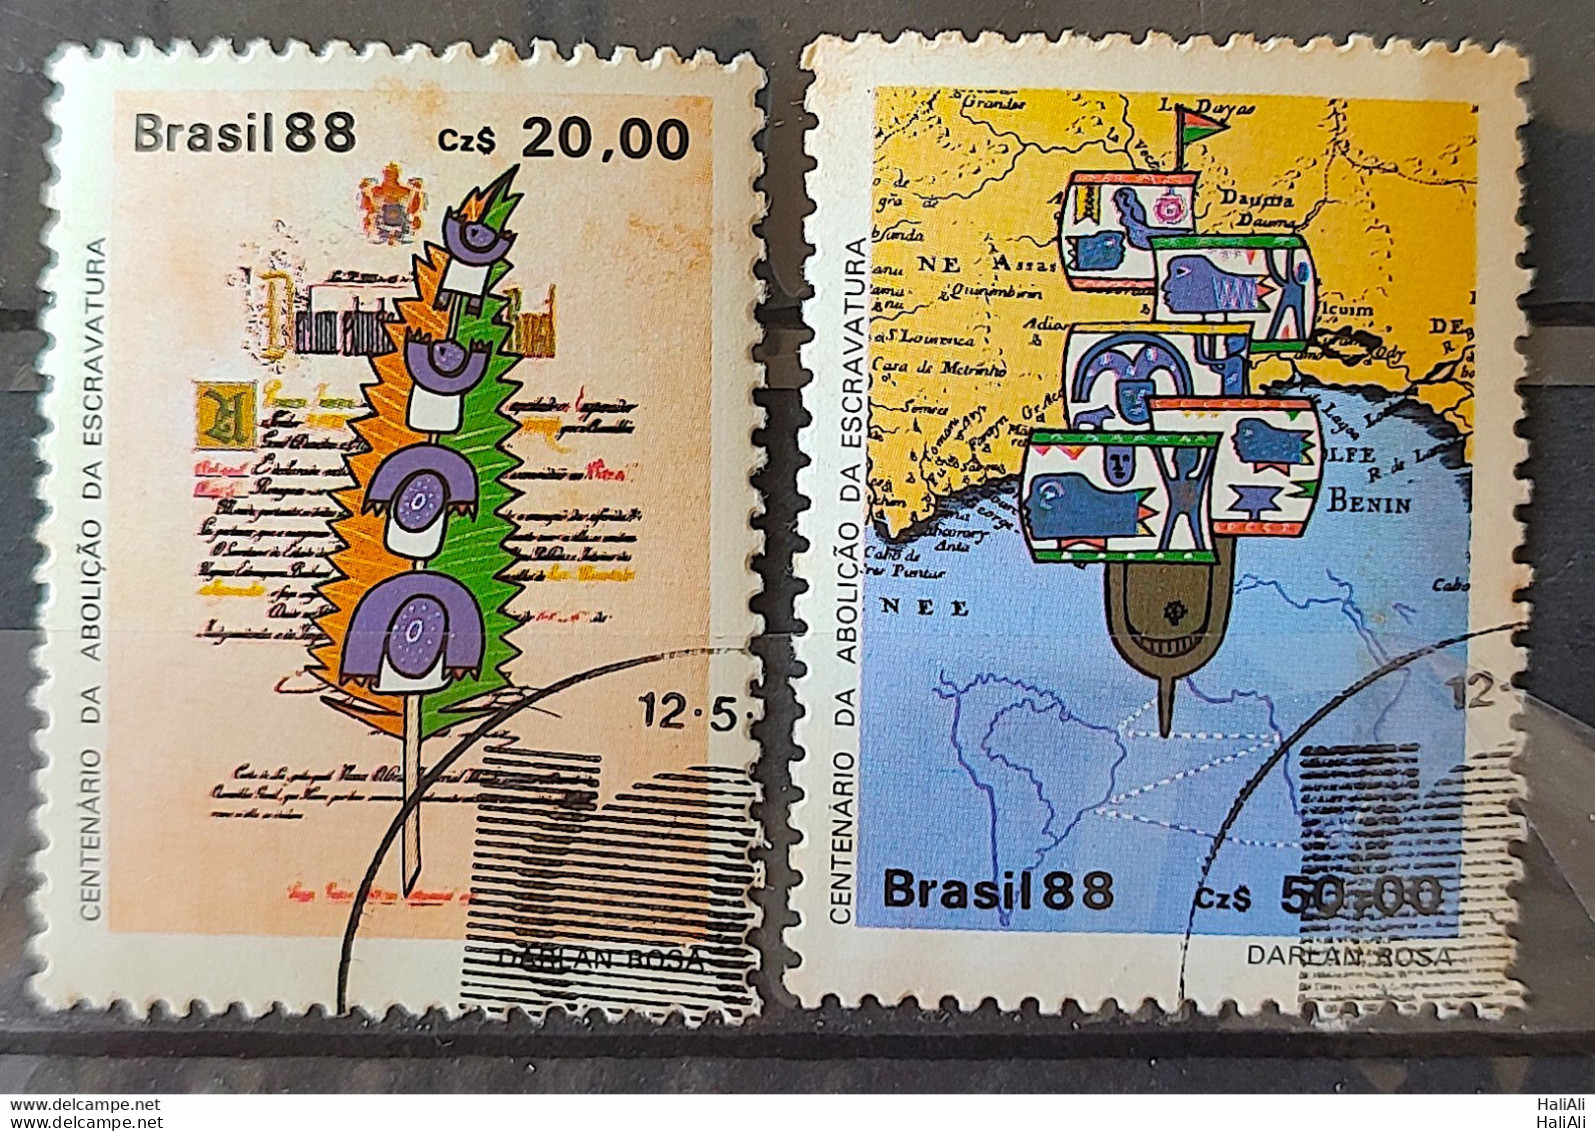 C 1583 Brazil Stamp 100 Years Abolition Of Slavery Law Aurea Ship Slave 1988 Complete Series Circulated 5 - Used Stamps